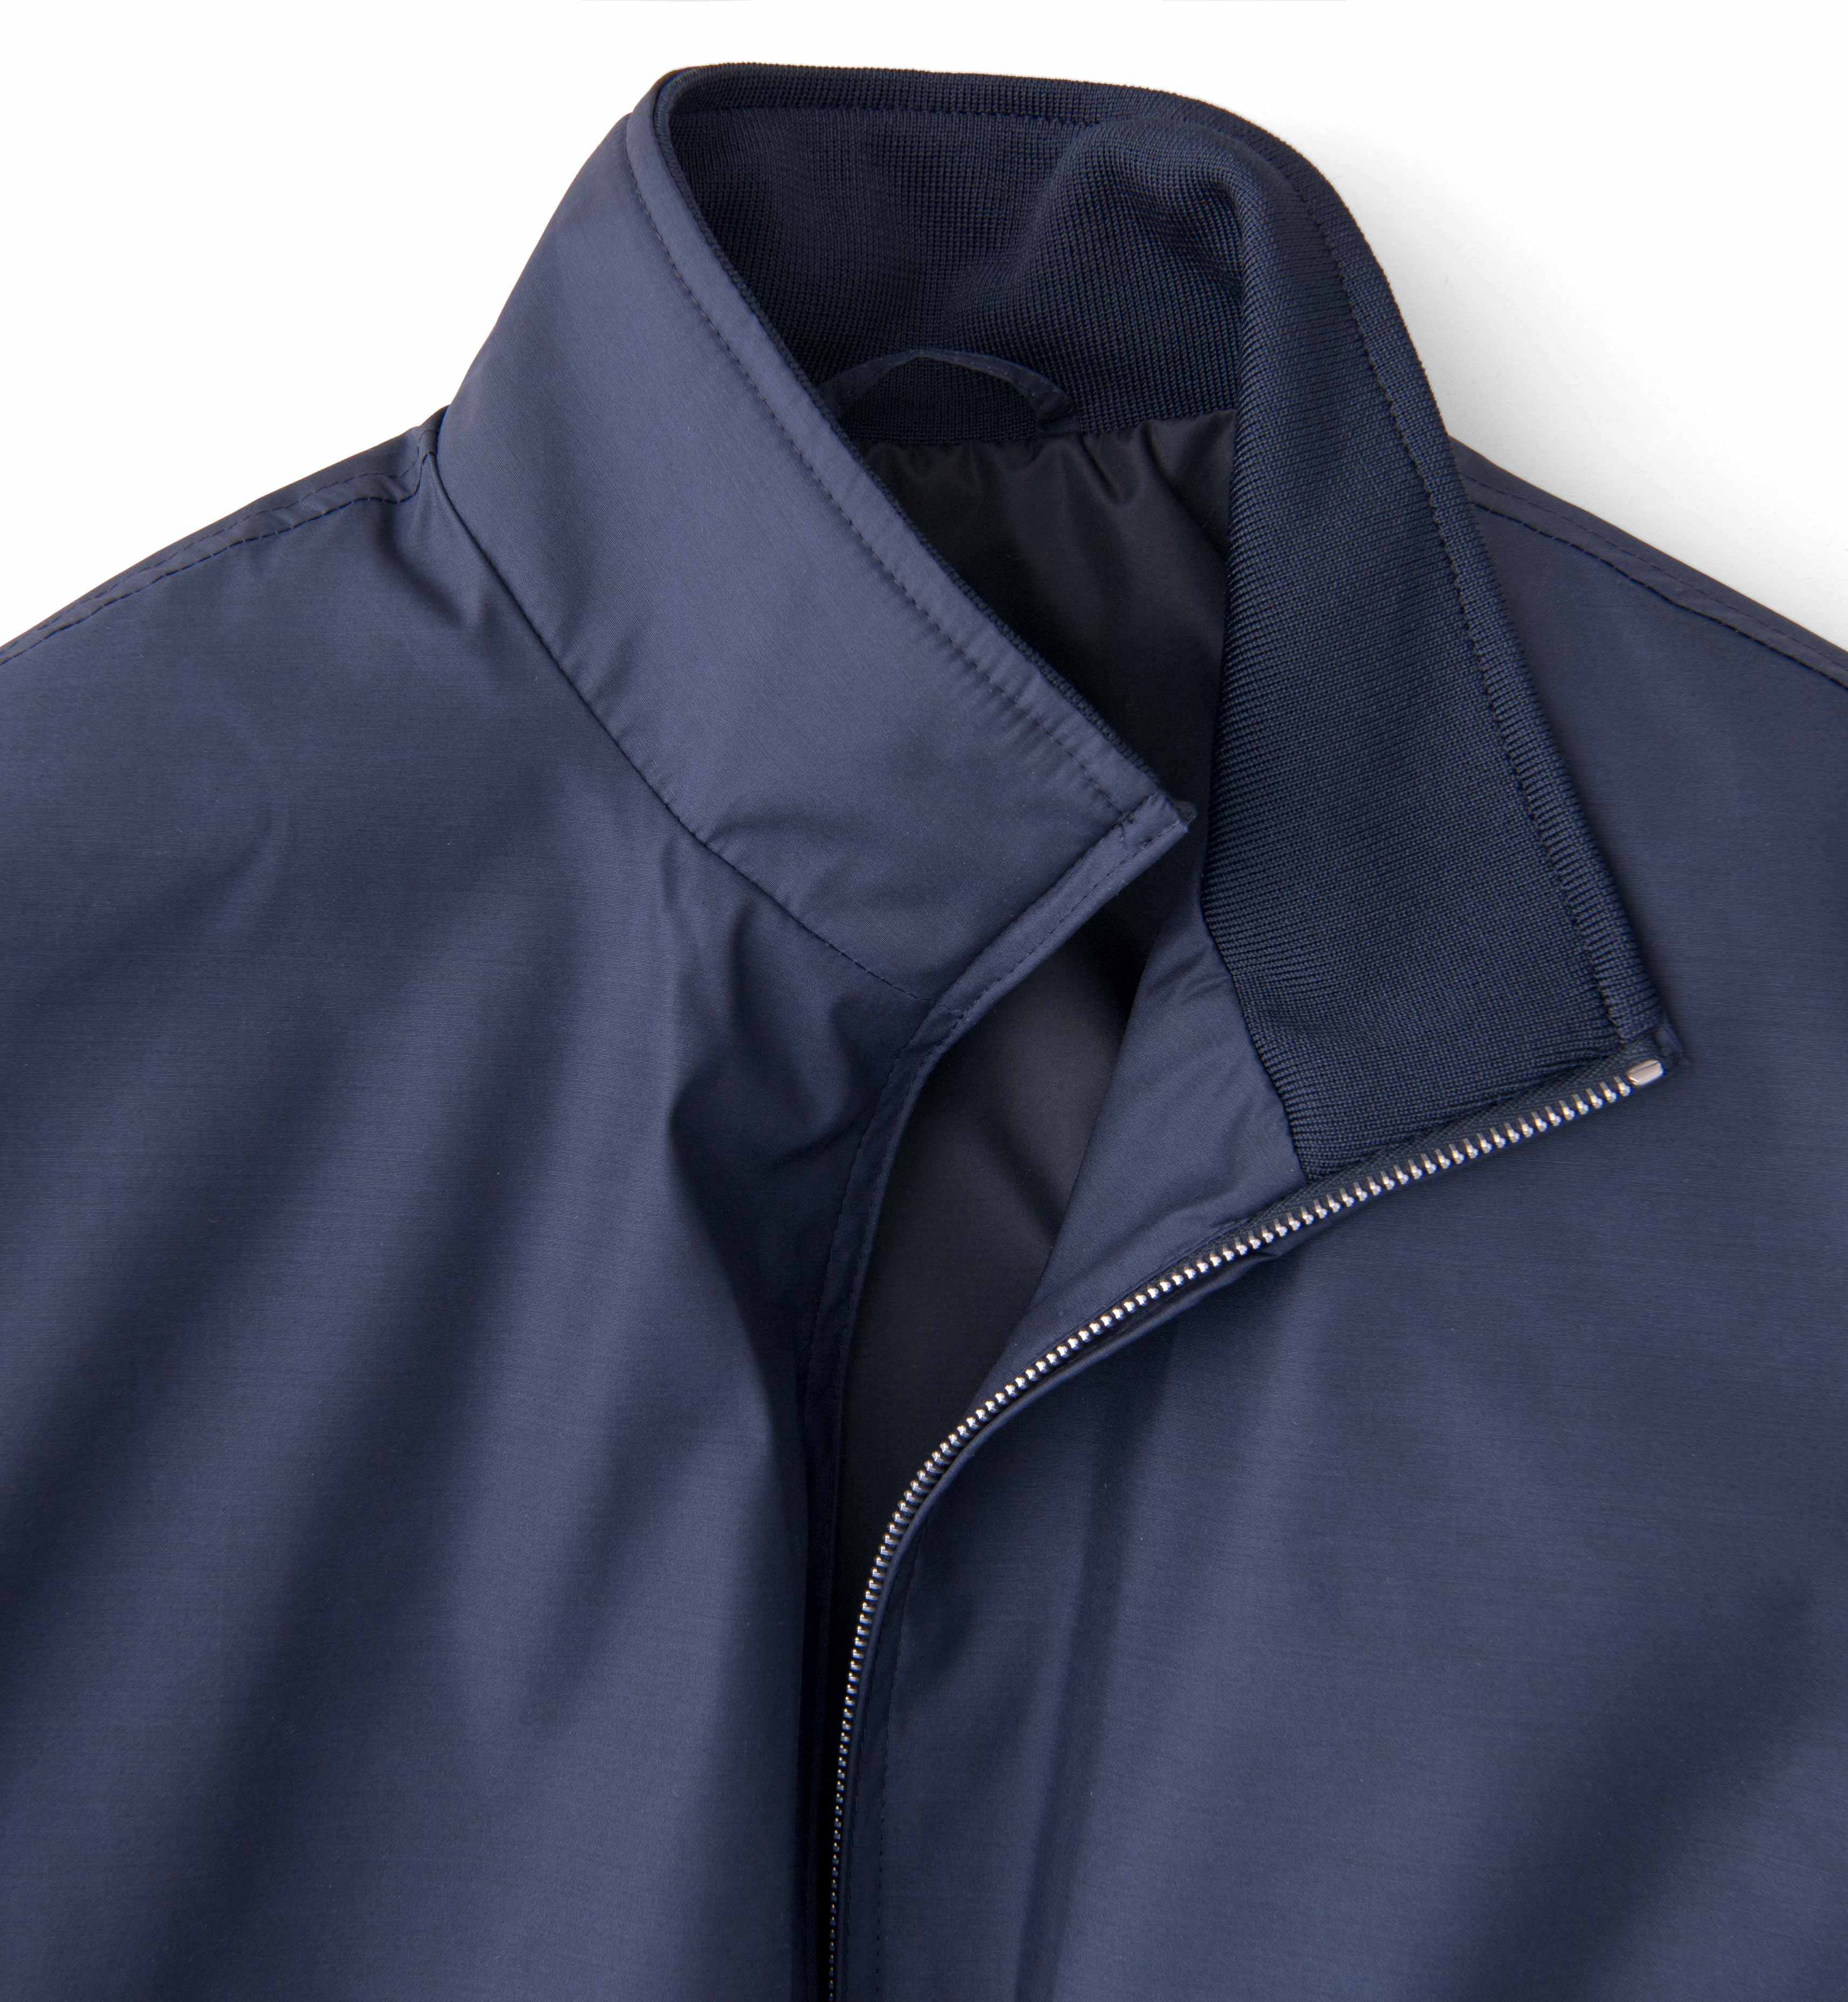 Lucca Navy Wool and Silk Performance Jacket by Proper Cloth